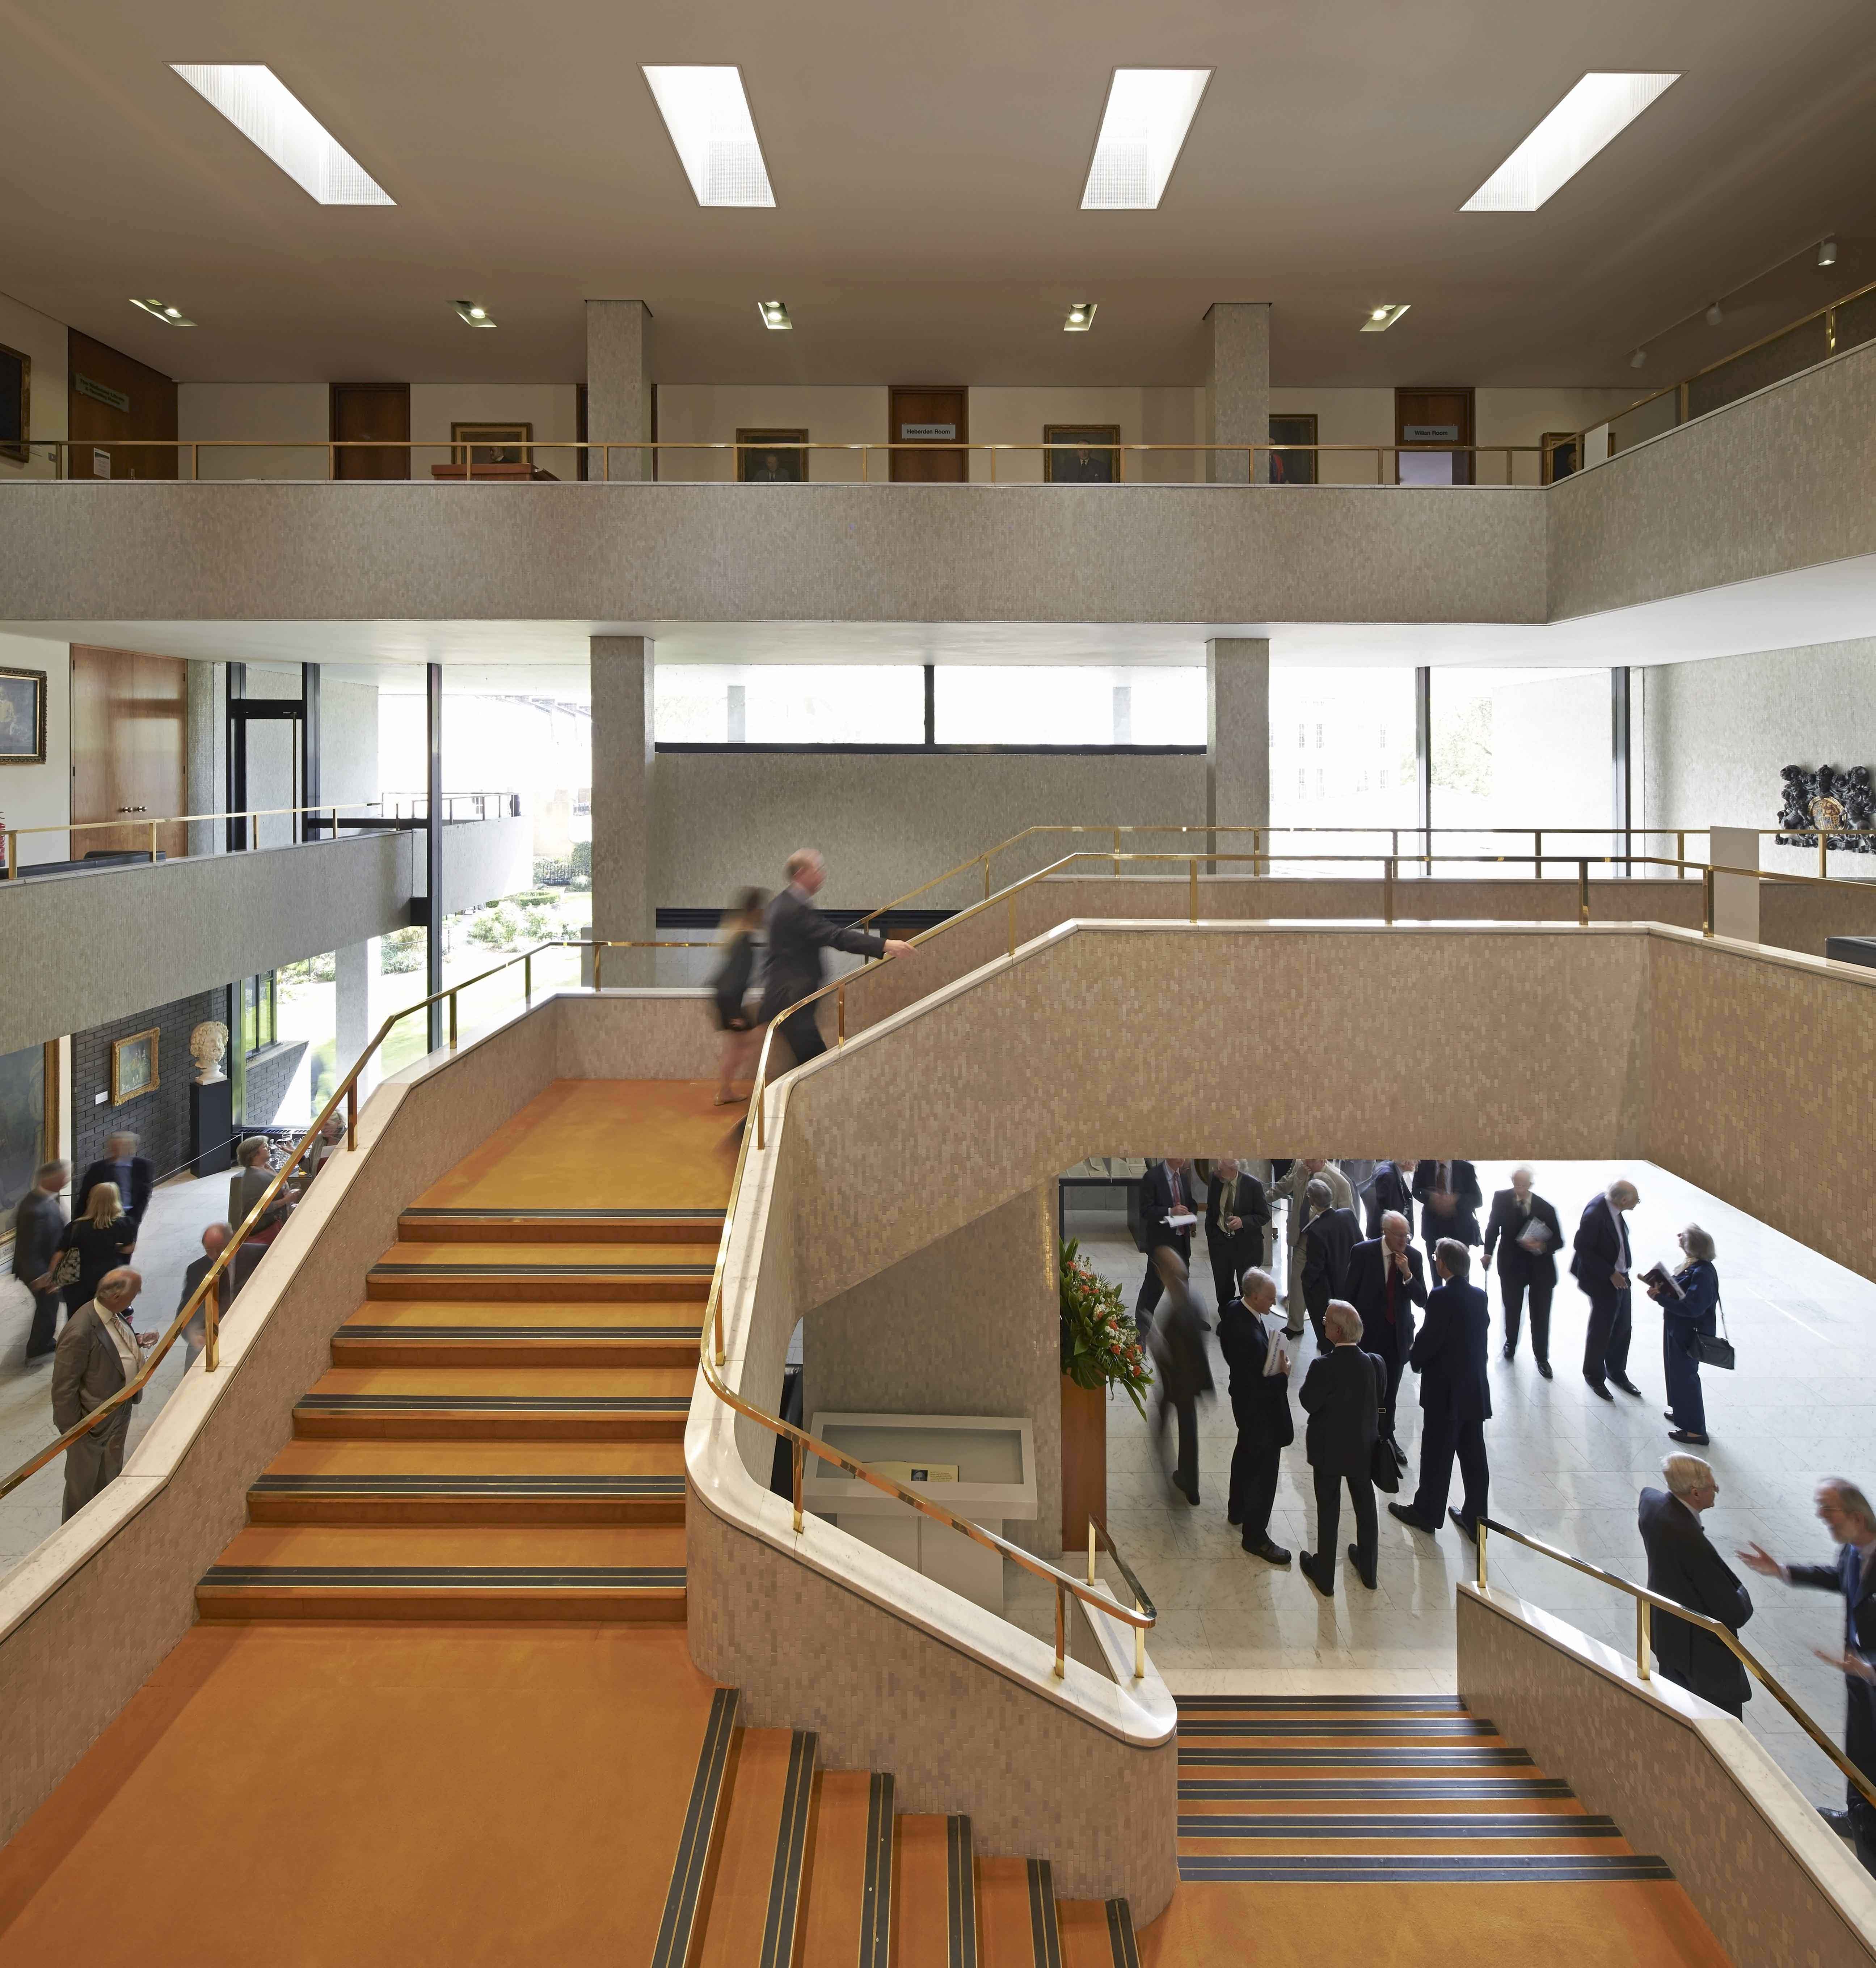 Interior of a building. A suspended staircase with orange carpet occupies most of the frame.